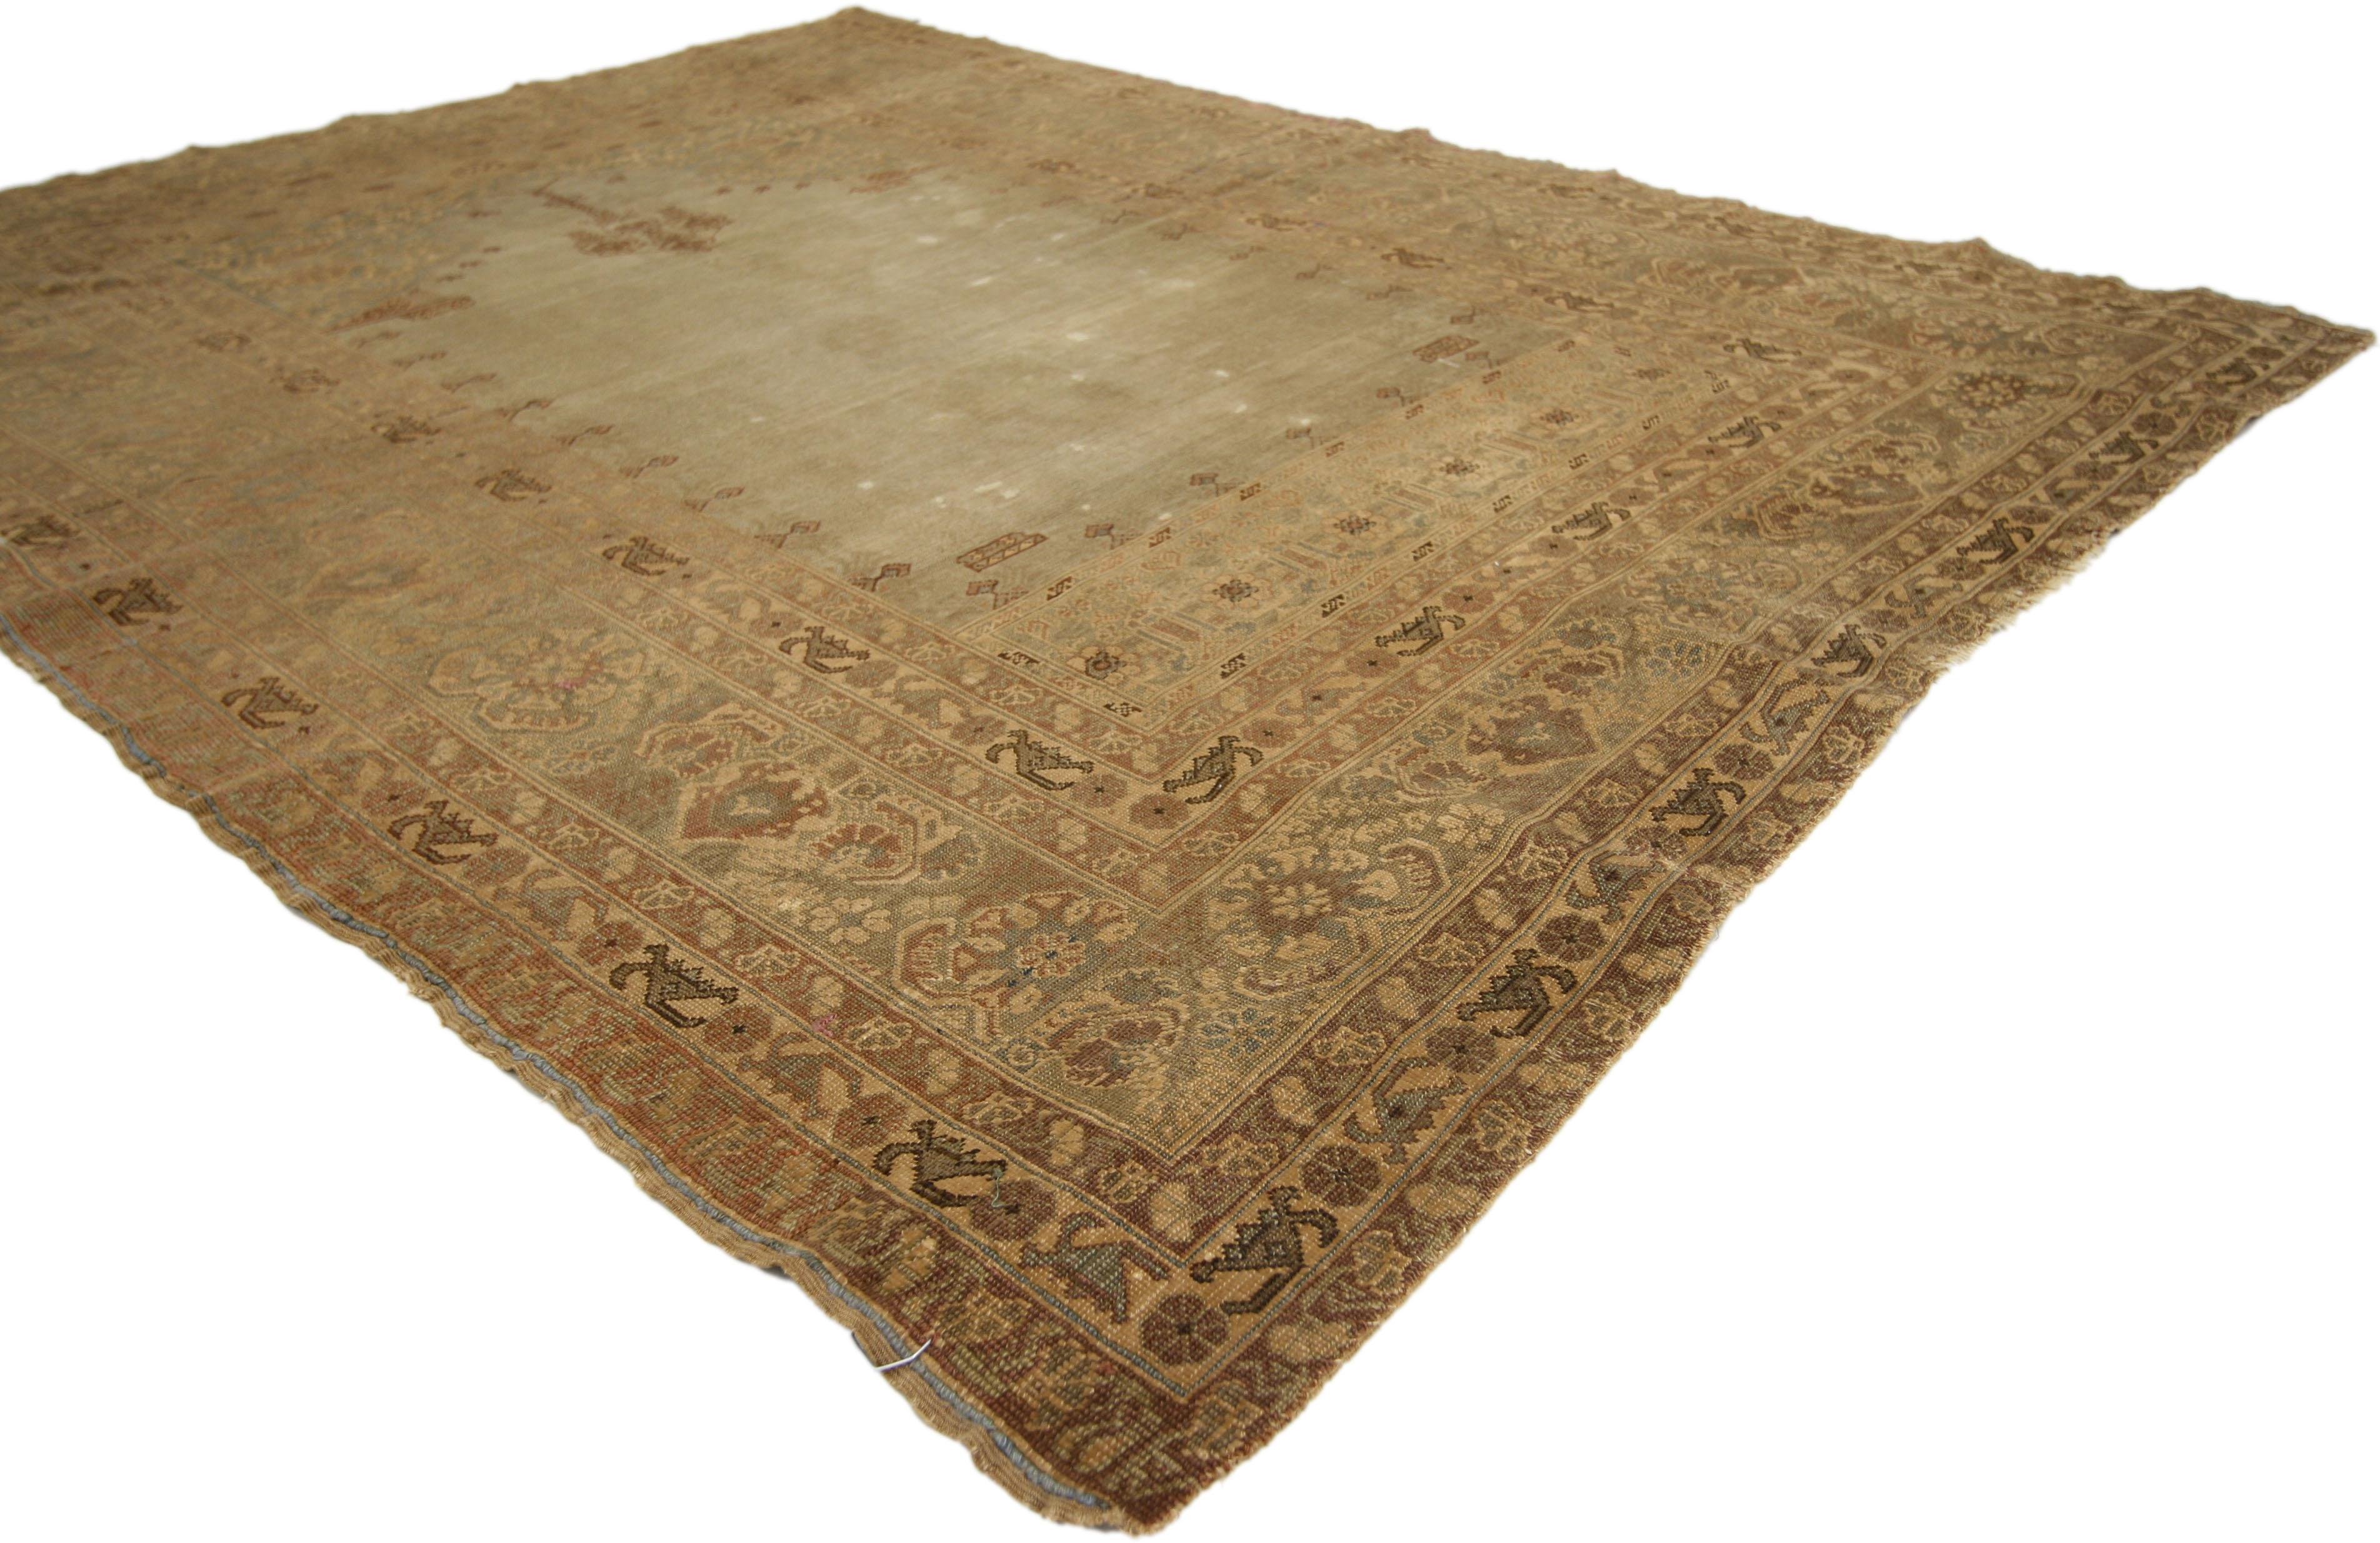 76611 Distressed Antique Turkish Sivas Prayer Rug 04’01 x 05’05. With its beguiling beauty and rustic sensibility, this hand knotted wool distressed antique Turkish Sivas prayer rug imparts a sense of warmth and welcomed informality. It features a